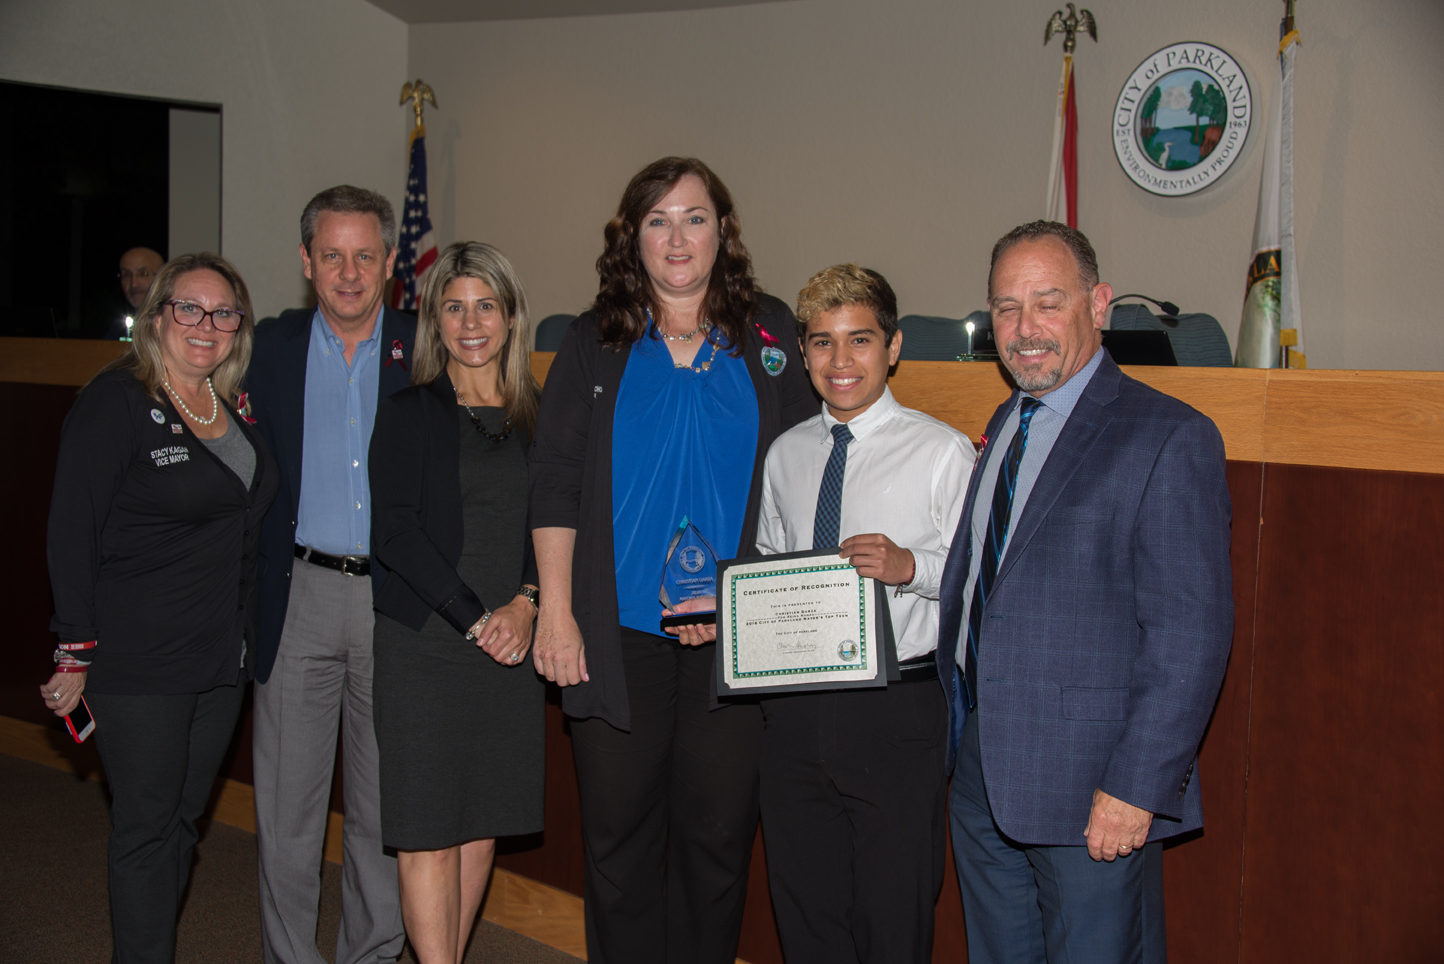 Parkland Students Take Home Awards at City Commission Meeting 3